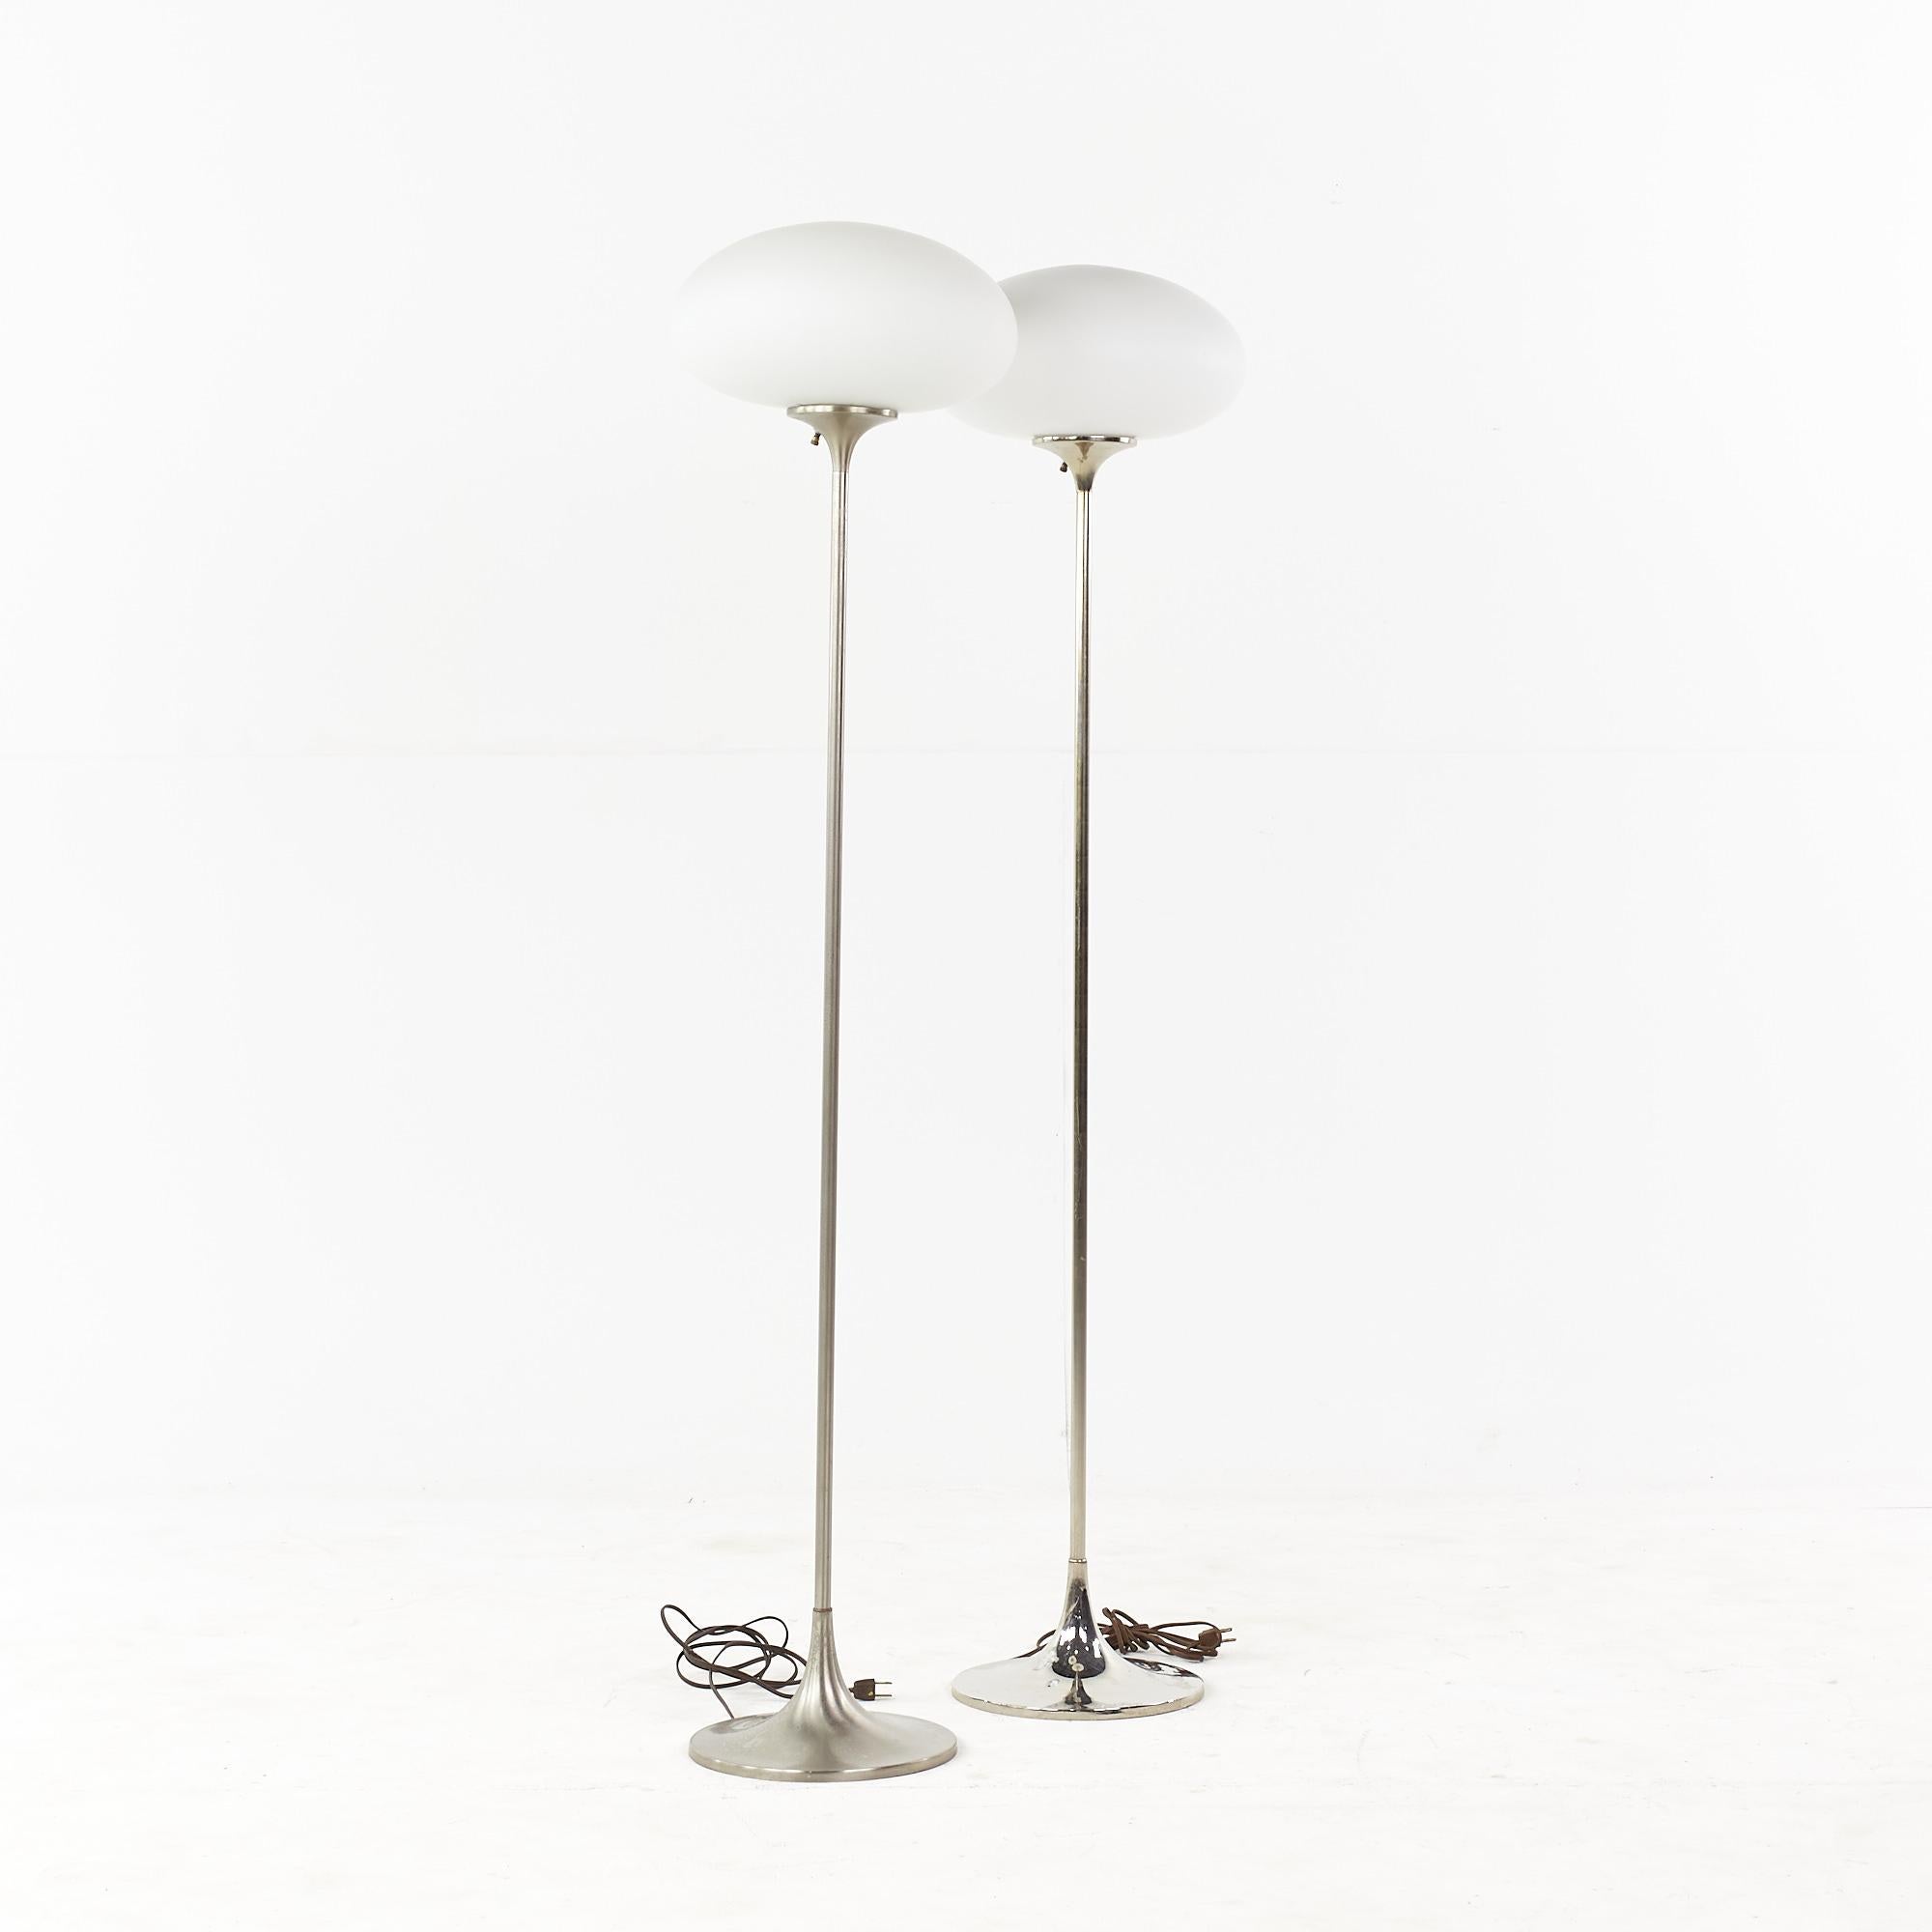 Laurel Lamp Company Mid Century Stainless Steel Tulip Floor Lamp - Pair

Each lamp measures: 12 wide x 12 deep x 56 inches high

This lamp is in Good Vintage Condition with some minor marks, dents, oxidation and film flaking from one of the